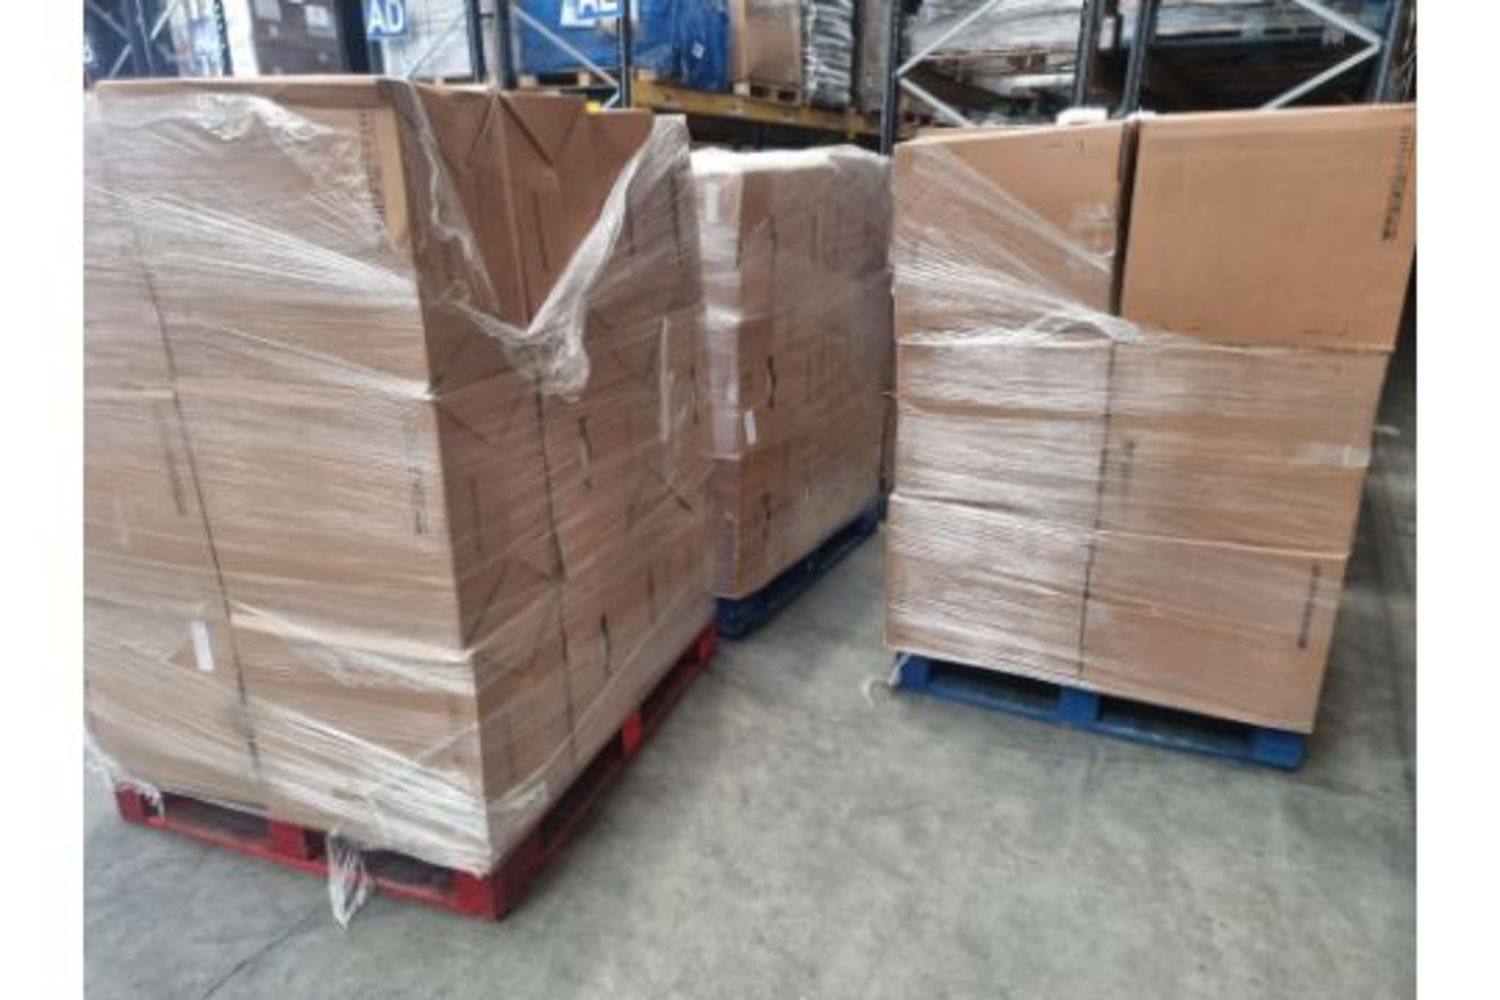 Liquidation of High Quality Toshiba Epos Systems - Sold In Pallet Lots - 40 Pallets - Delivery Available